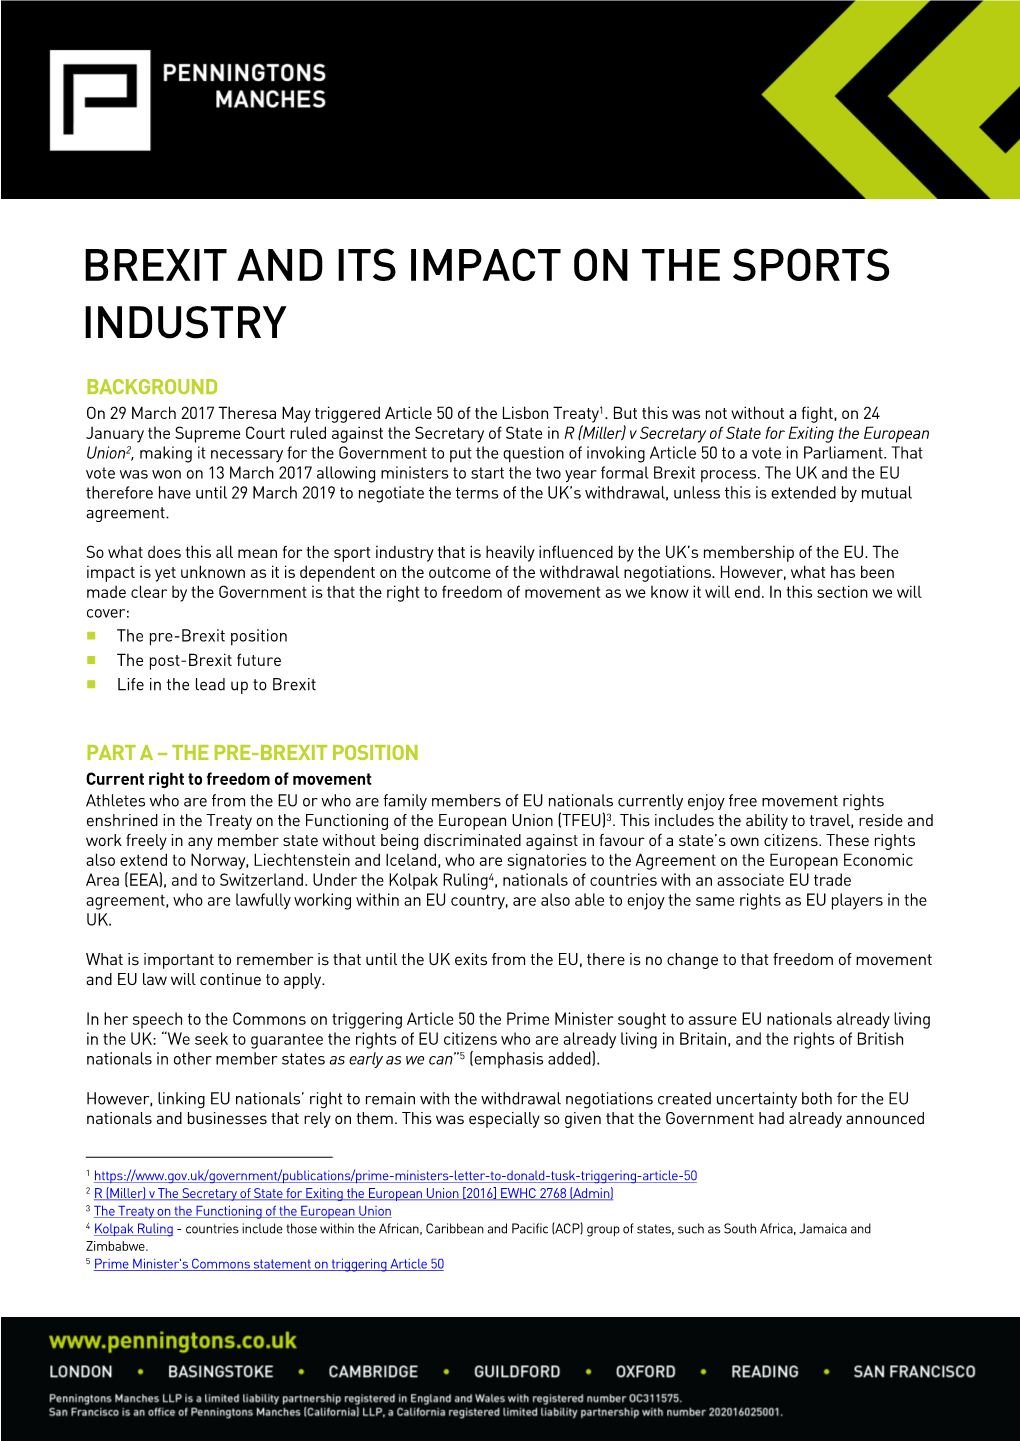 Brexit and Its Impact on the Sports Industry